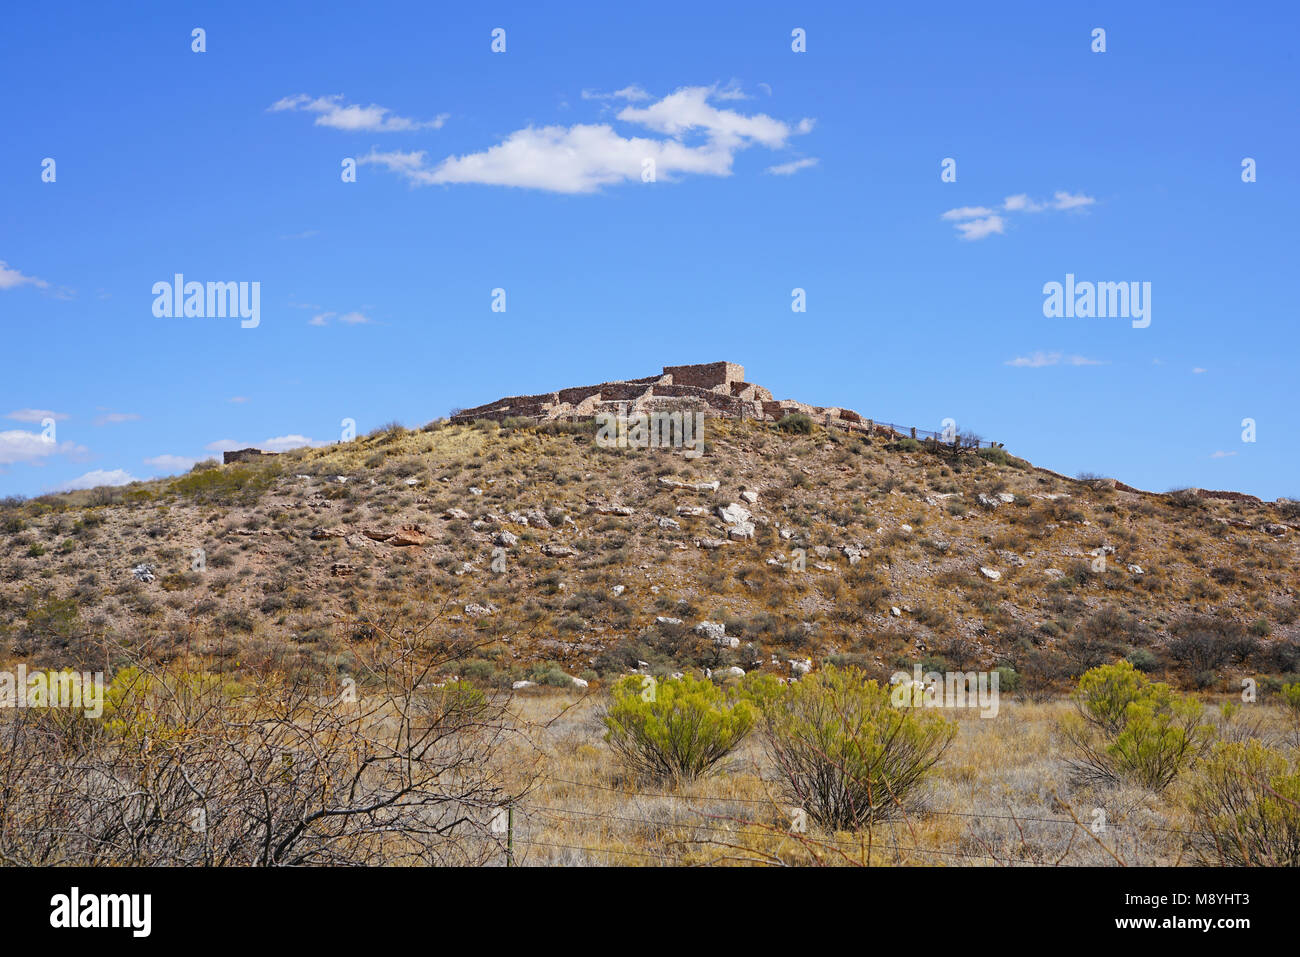 View of the Tuzigoot National Monument, a pueblo ruin on the National Register of Historic Places in Yavapai County, Arizona Stock Photo